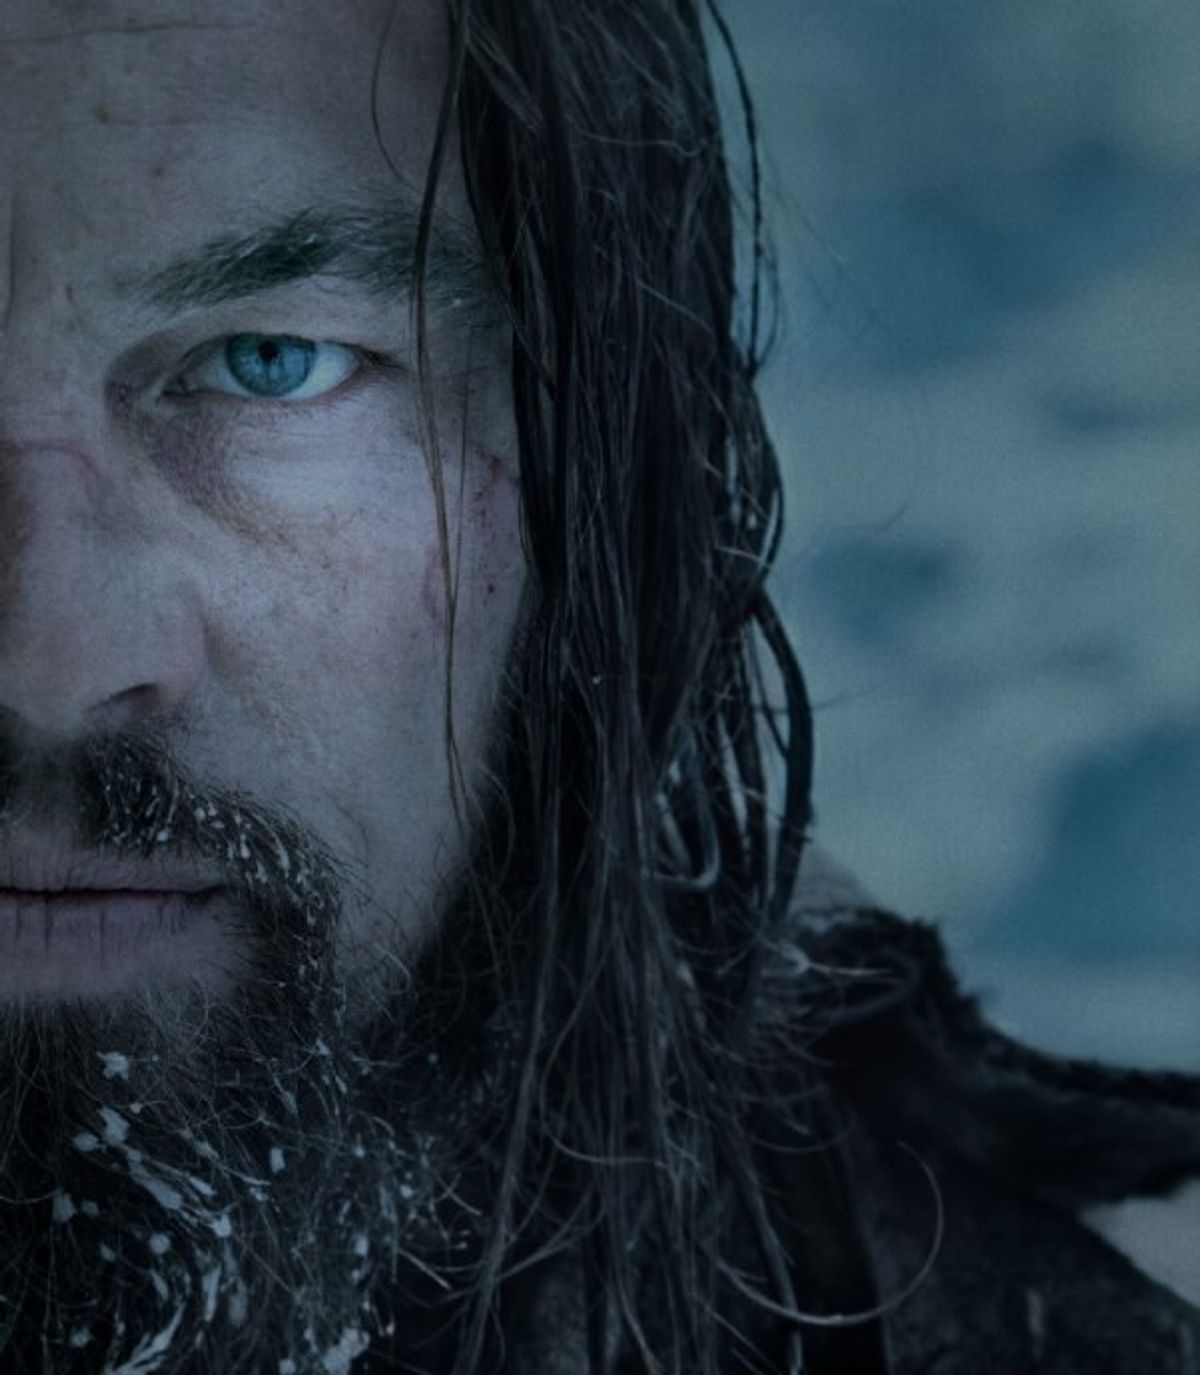 The Revenant: A Savage Review & Analysis